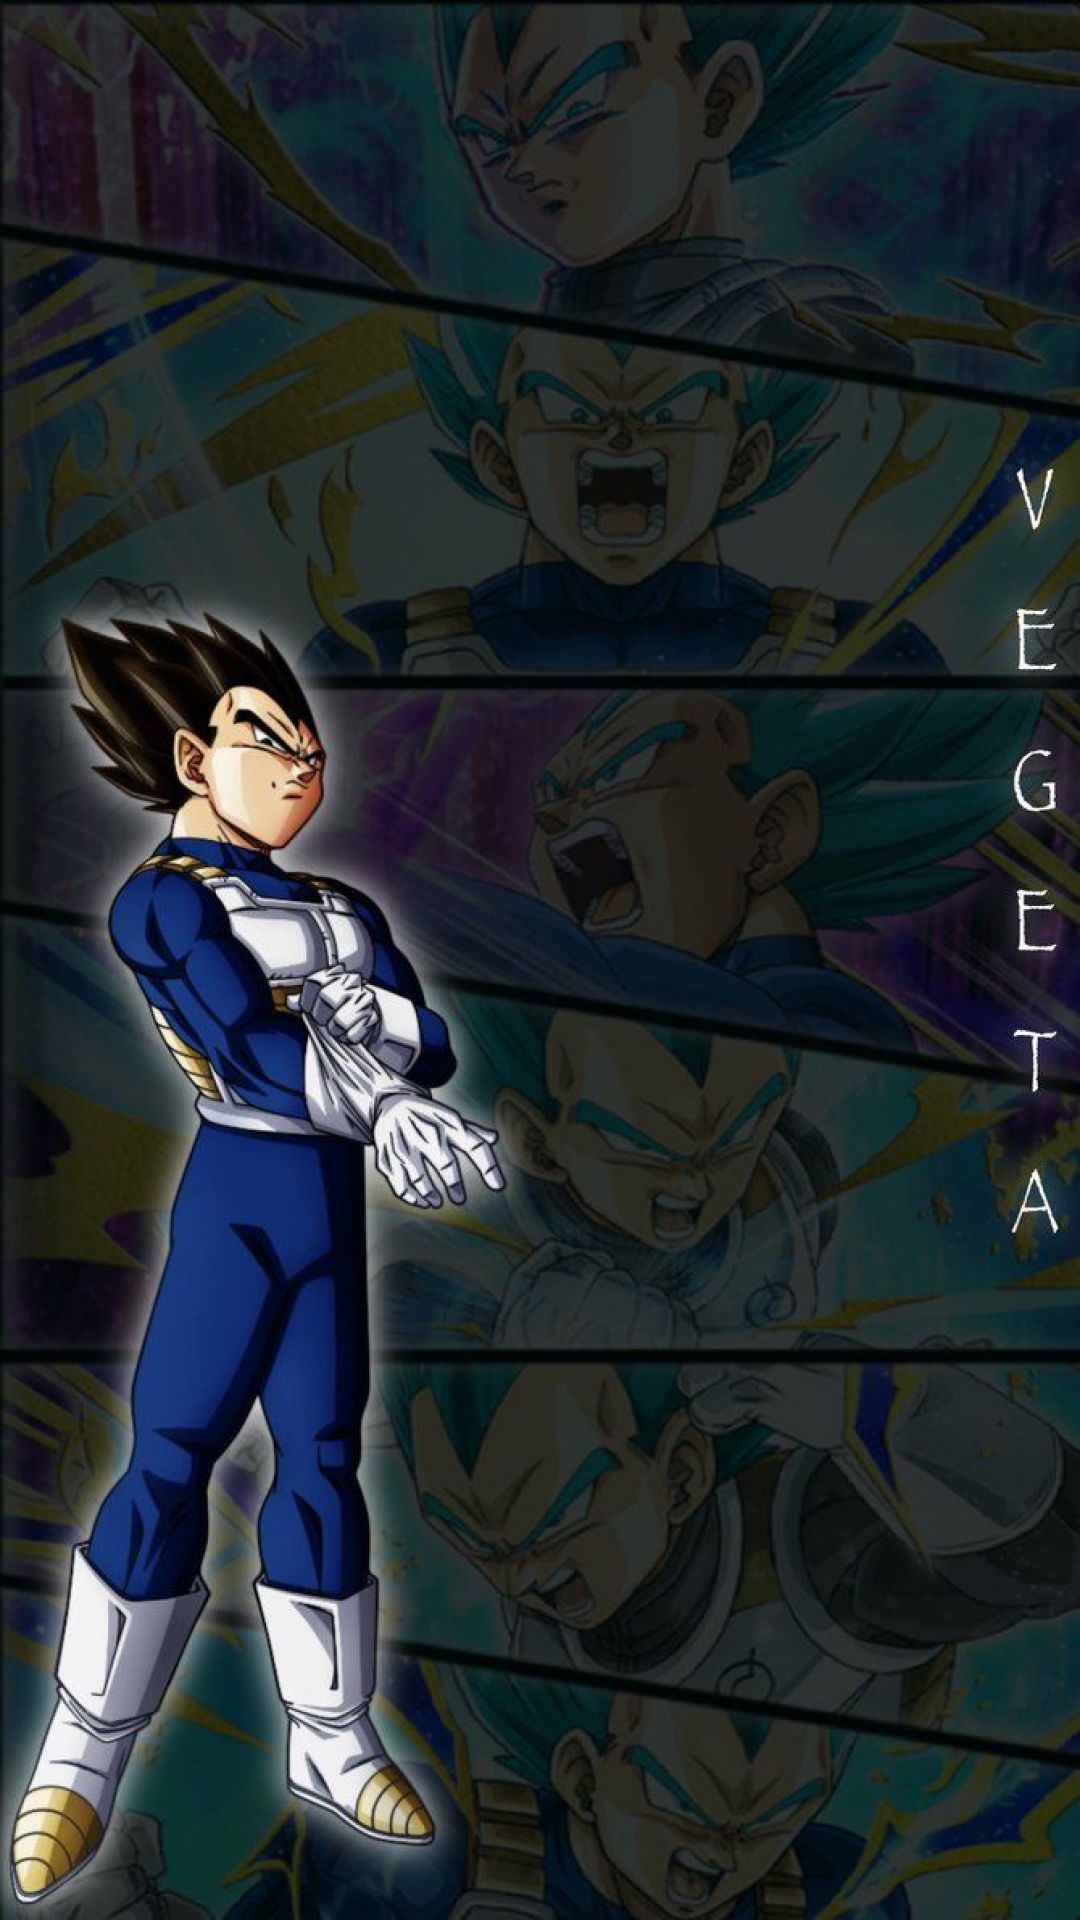 Android, Iphone, Desktop Hd Backgrounds / Wallpapers - Prince Vegeta Wallpaper Iphone - HD Wallpaper 